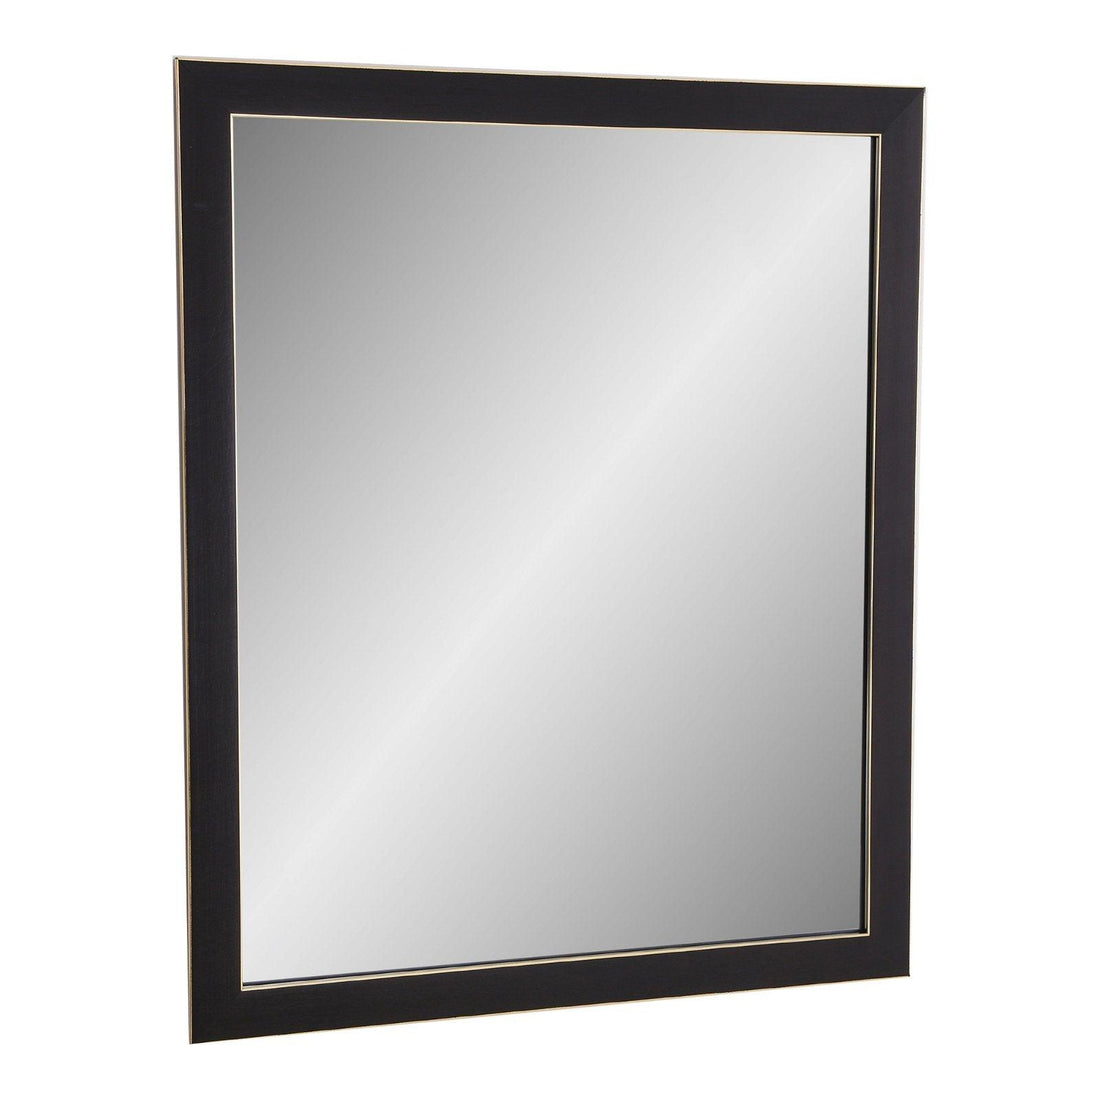 Black And Gold Edged Mirror - £31.99 - Mirrors 